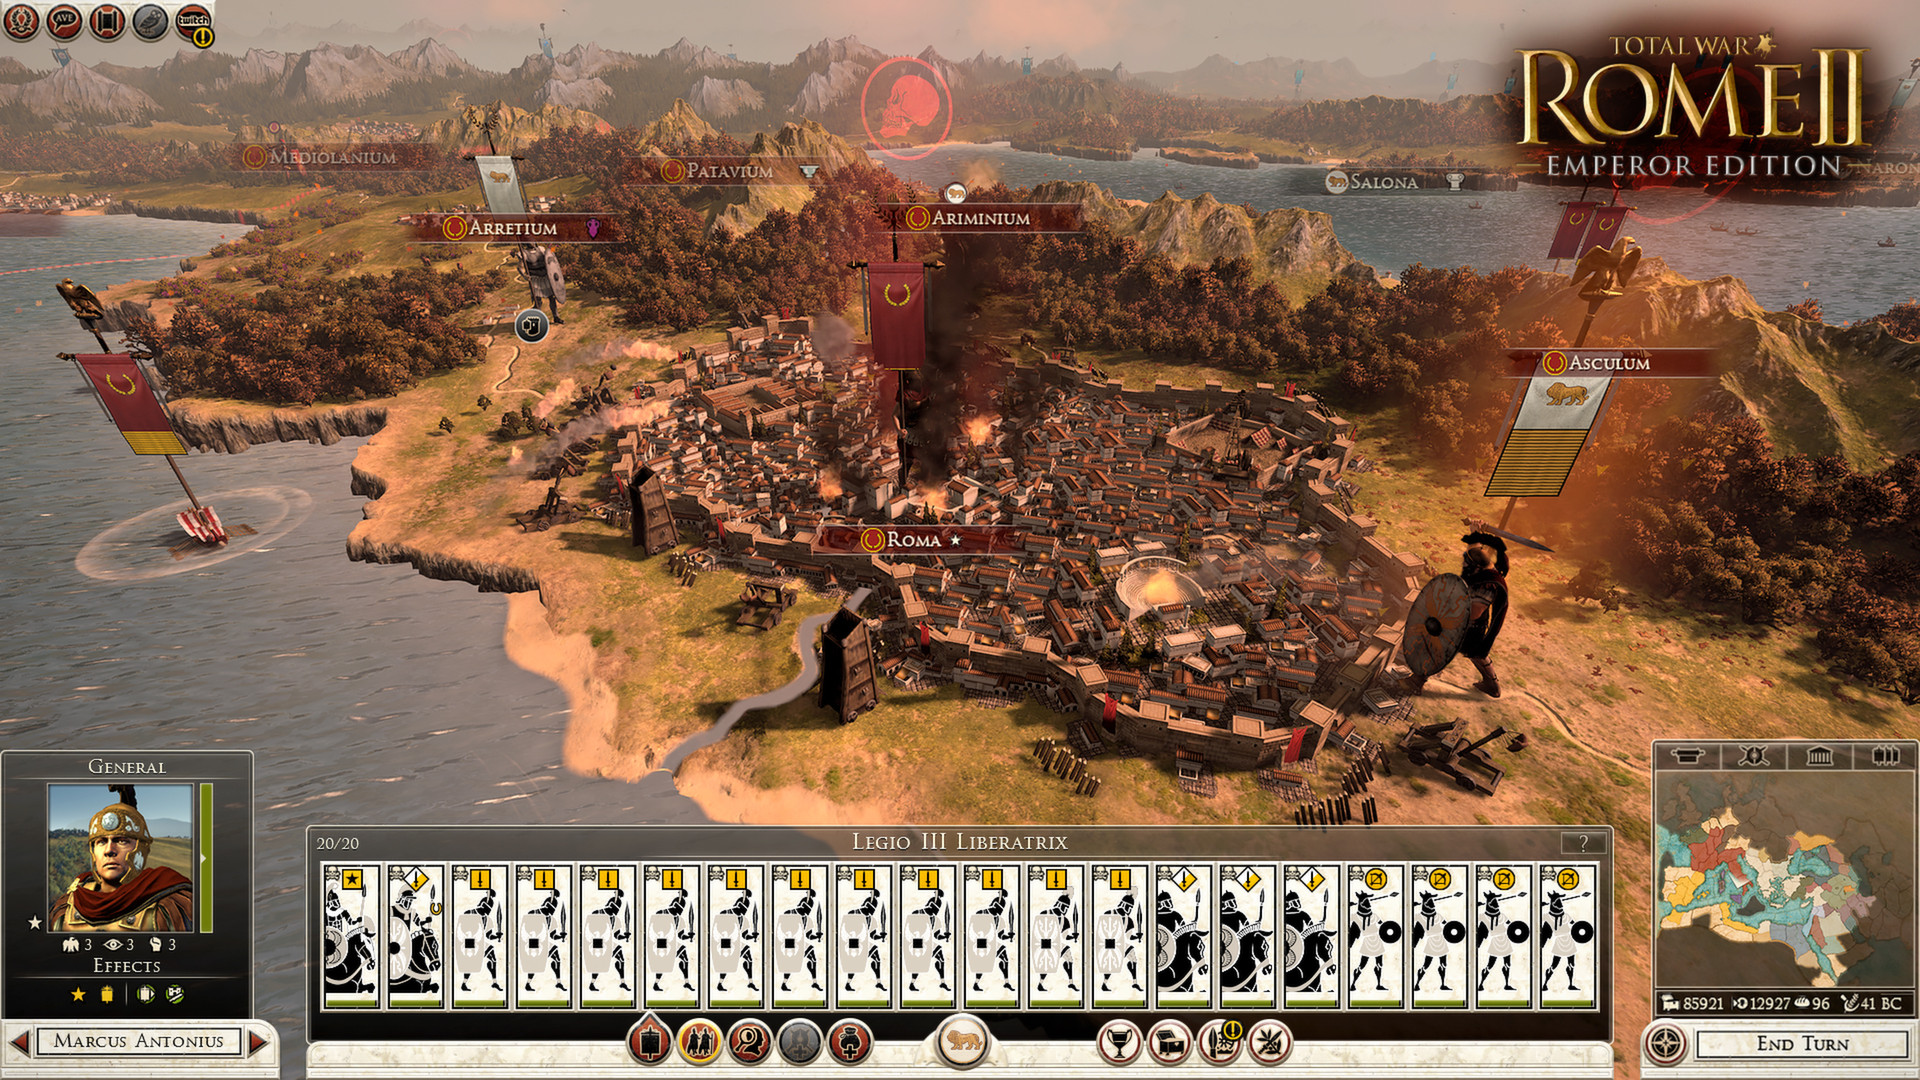 How Do You Install A Mod For Total War Rome 2 On Mac Os